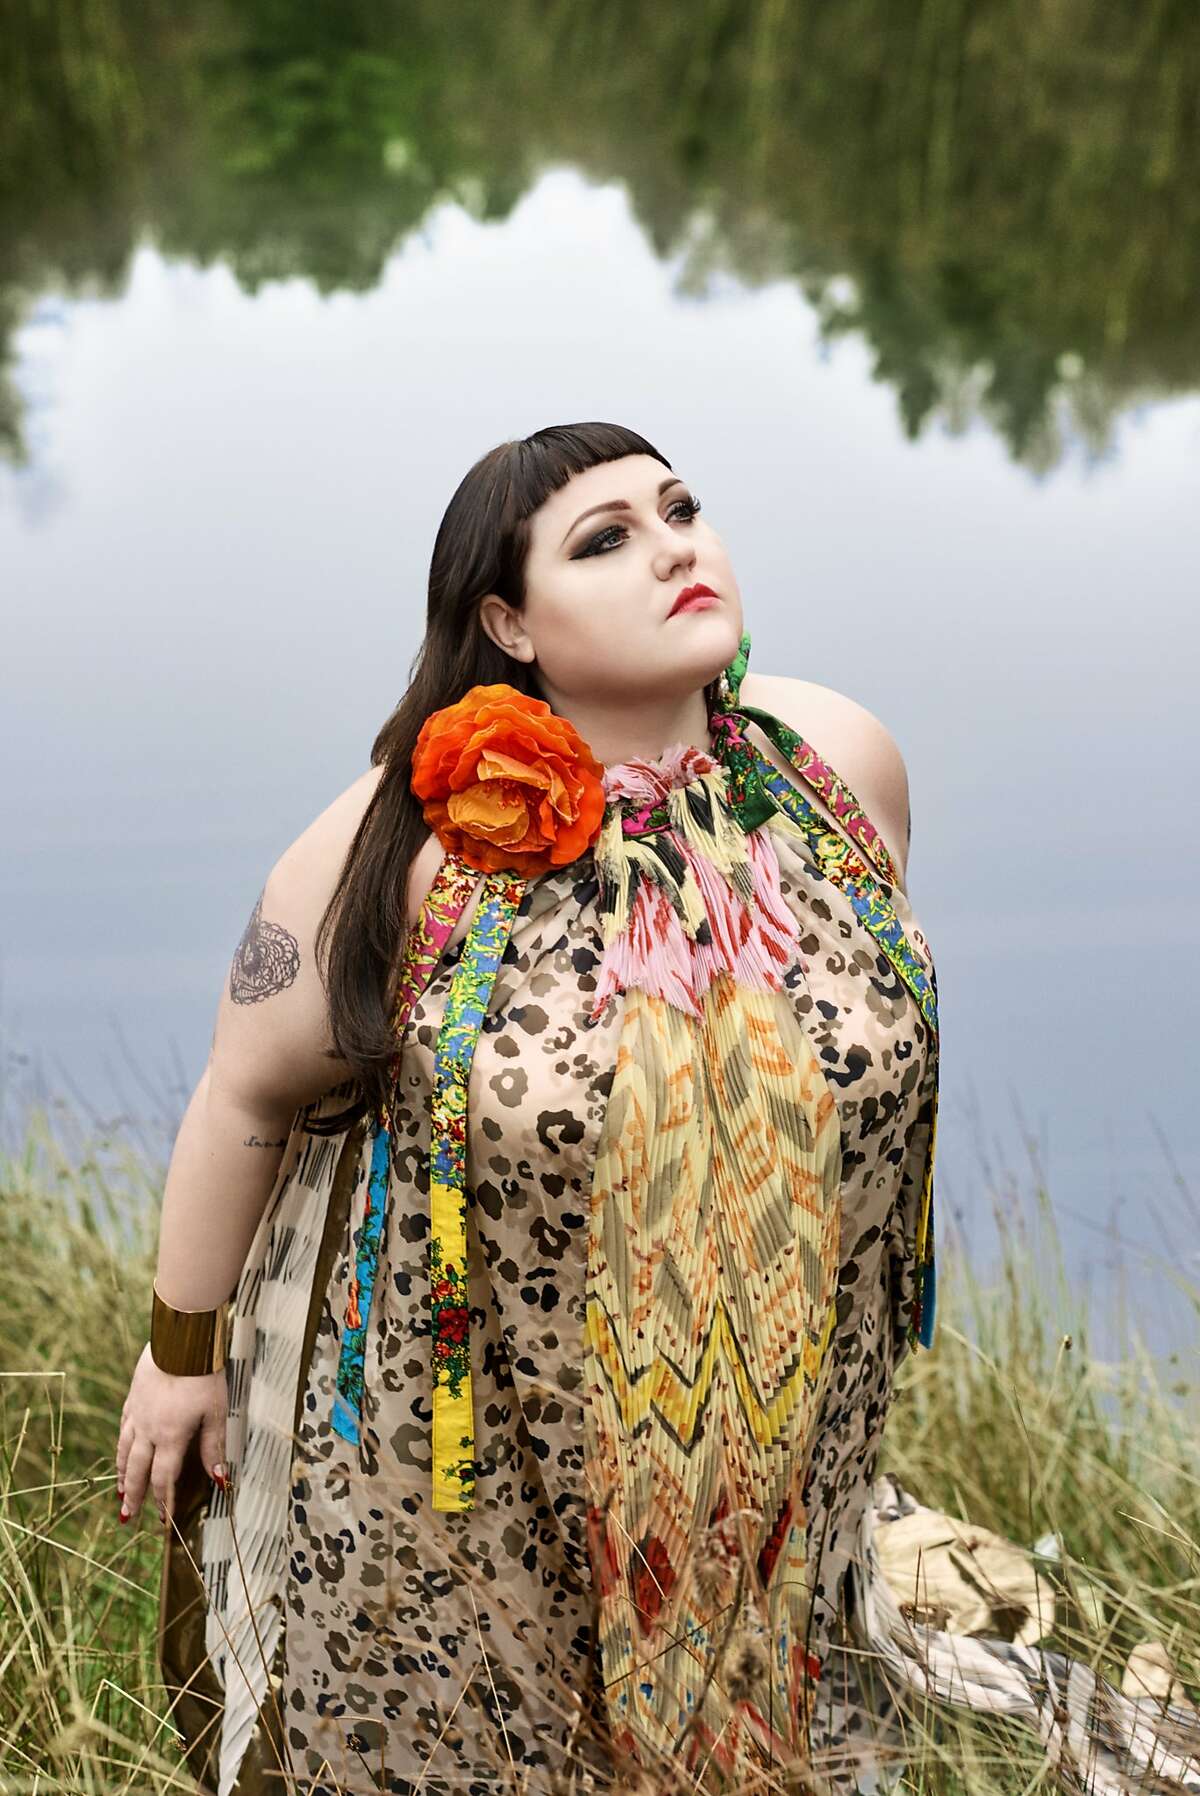 Beth Ditto is going on tour to promote her first full-length solo album. She was formerly the front woman for Gossip.